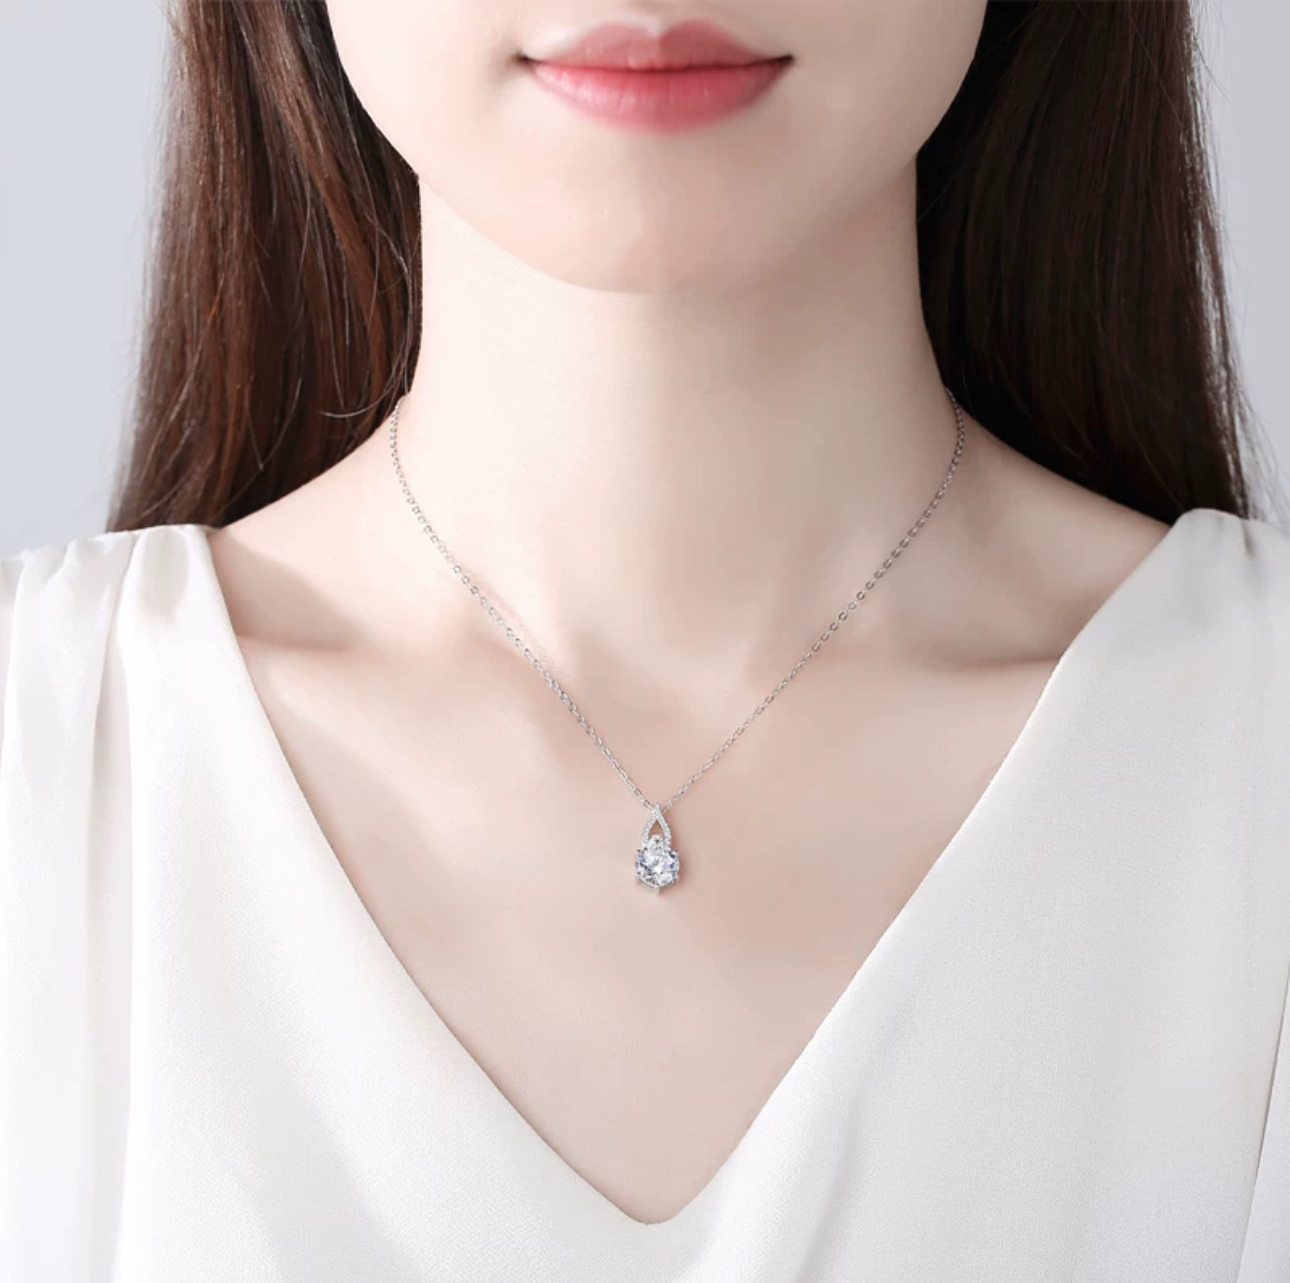 The six-prong synthetic gem necklace is custom made of quality that touches the heart